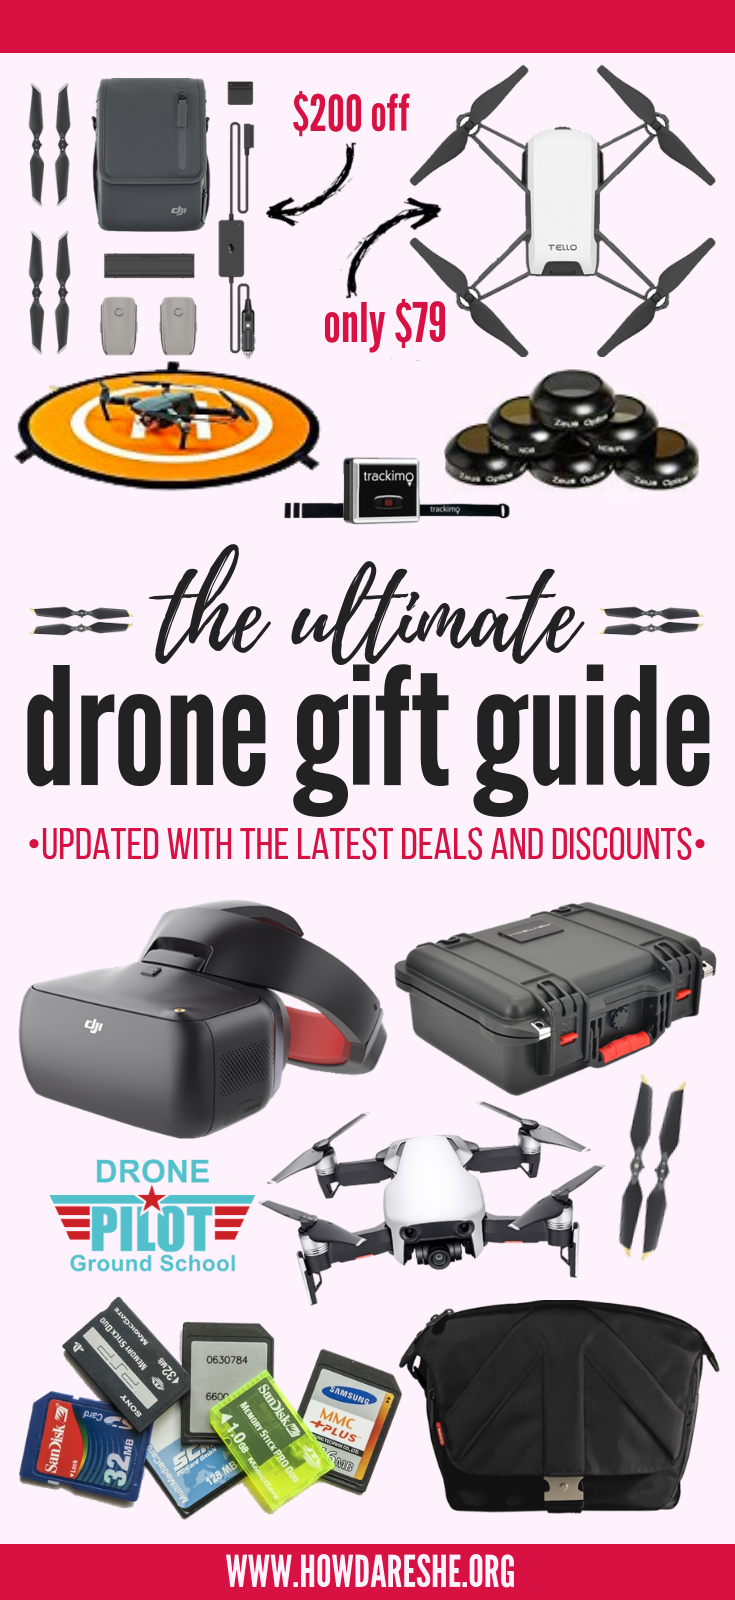 Drone gift guide: drone gift ideas for any budget